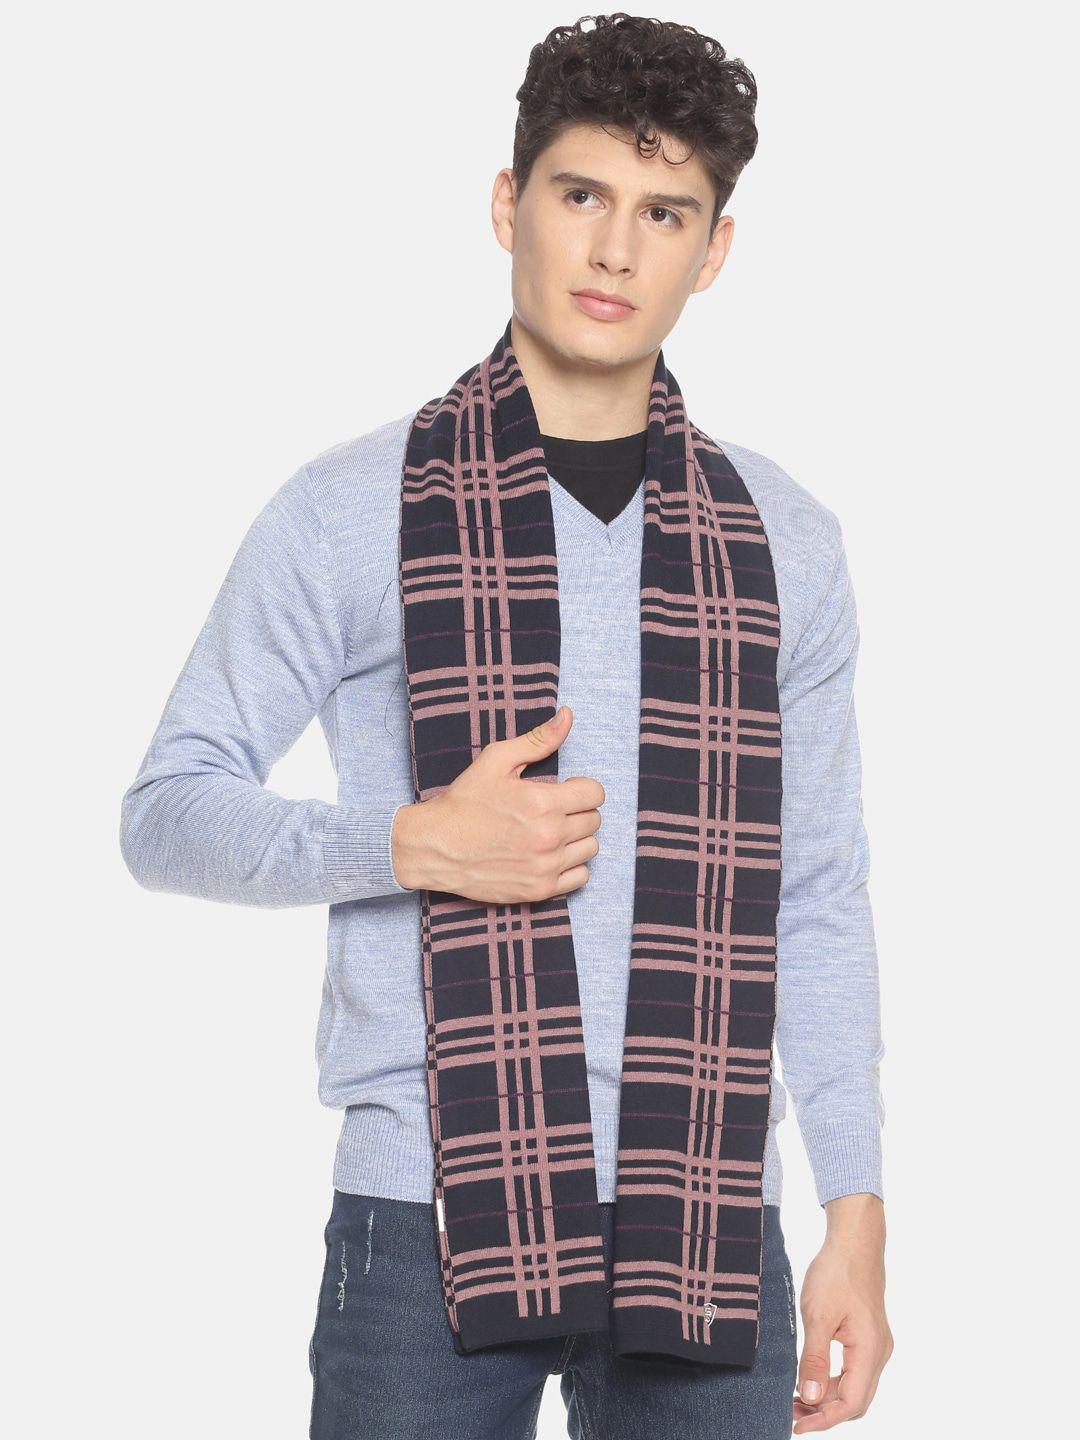 513-men-navy-blue-and-beige-checked-knitted-muffler